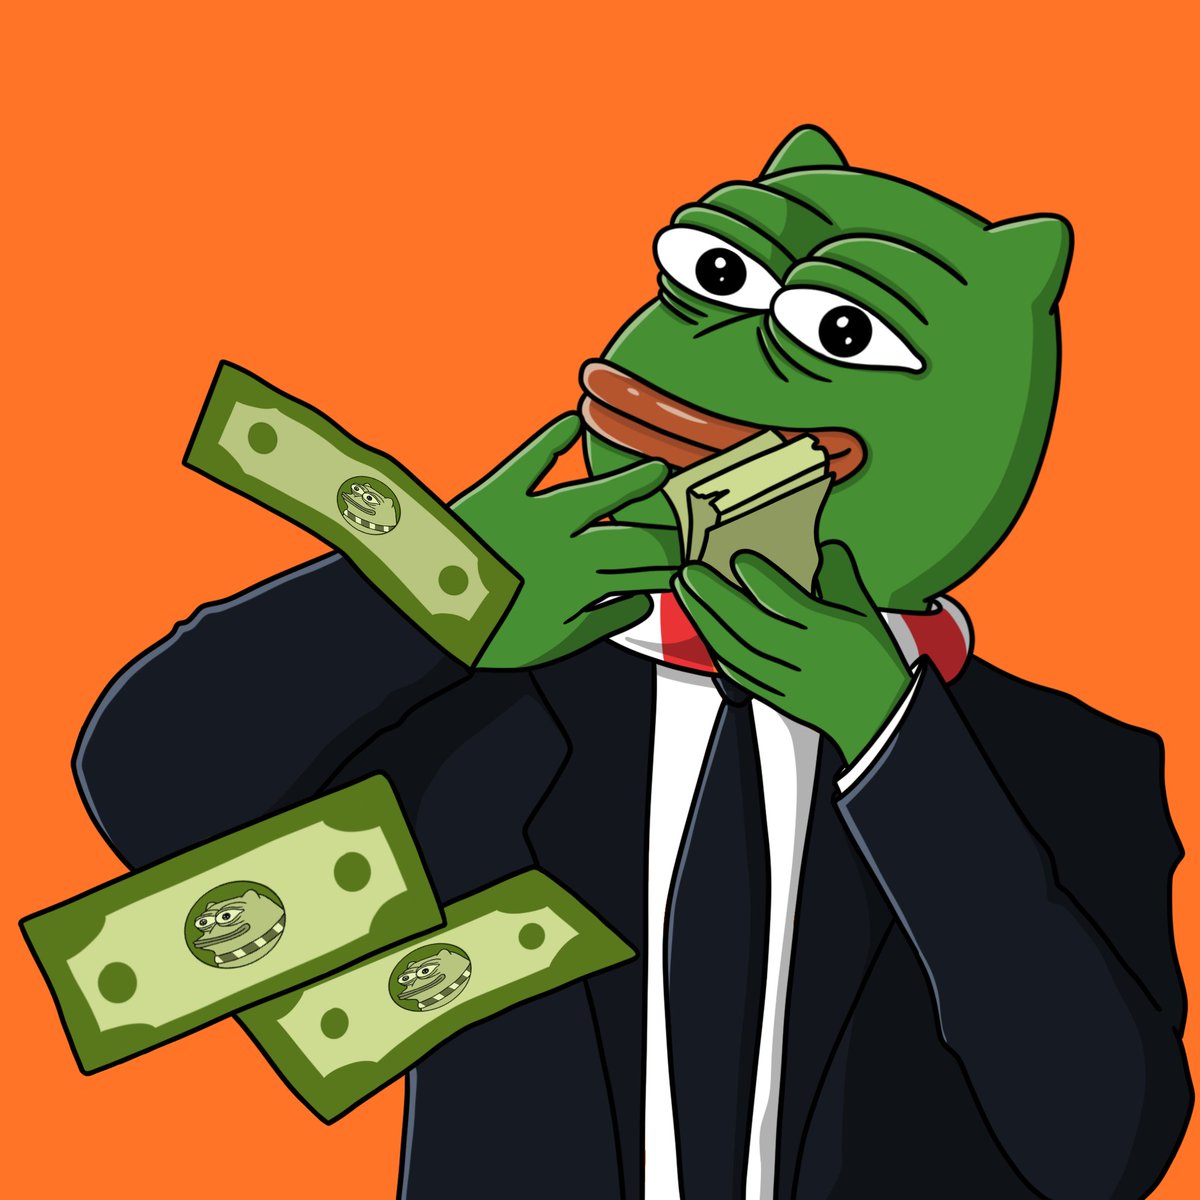 Ok Fronk Army, time to make some noise. 🐸 Sending 690M $FRONK to the loudest fronklets in the comments 💰 RT + post your $SOL address, GO! 👇